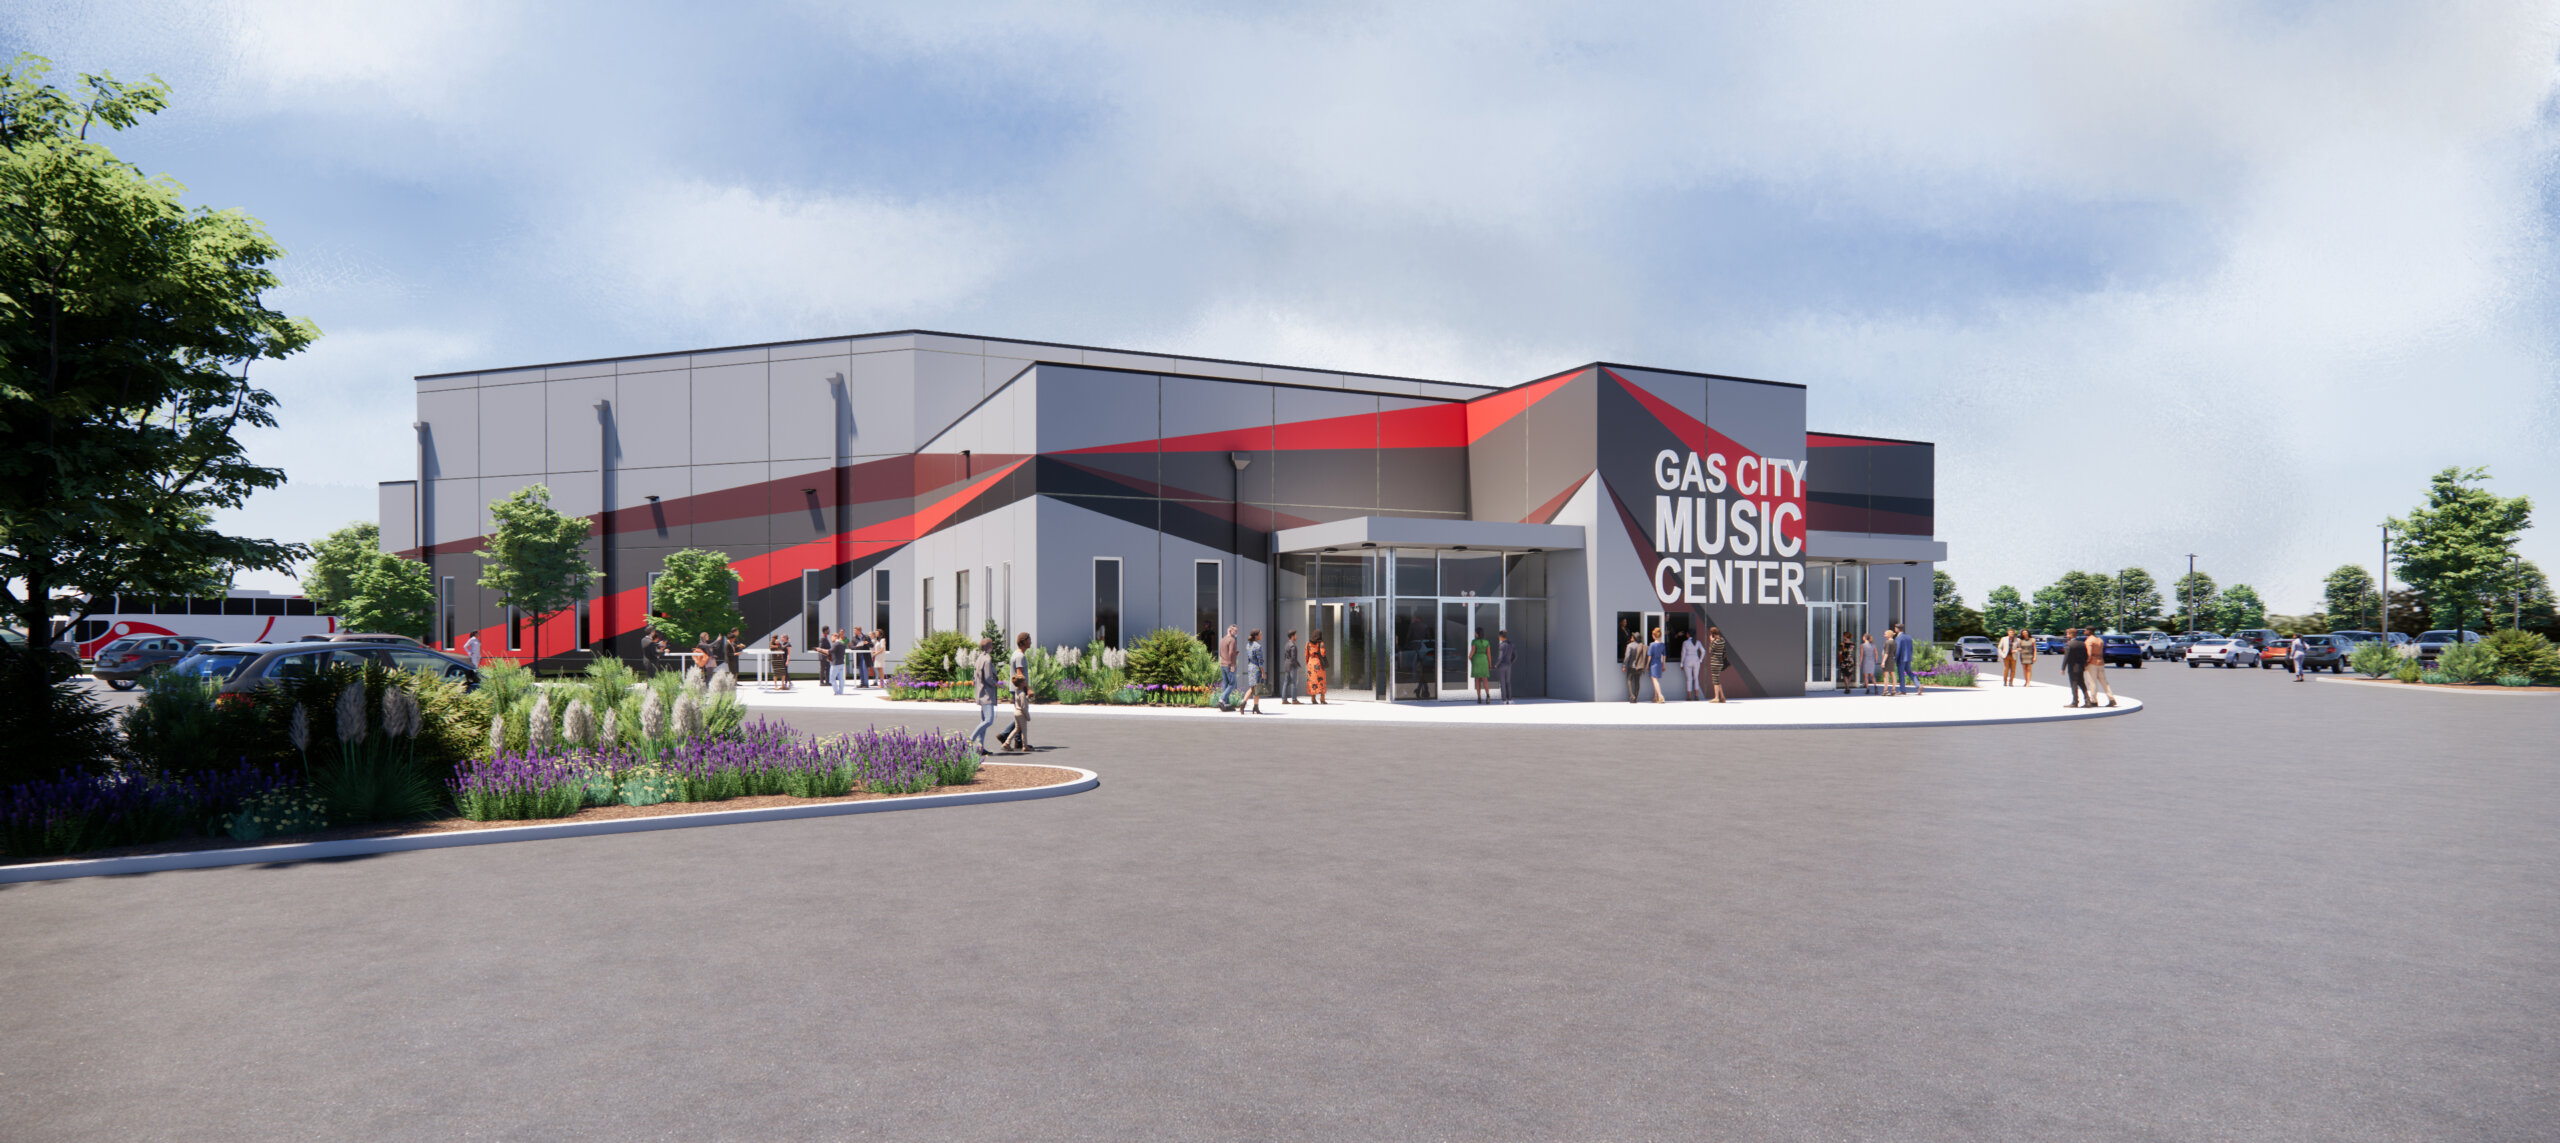 Groundbreaking Ceremony Marks the Beginning of Construction for Gas City Music Center, an Exciting New Venue